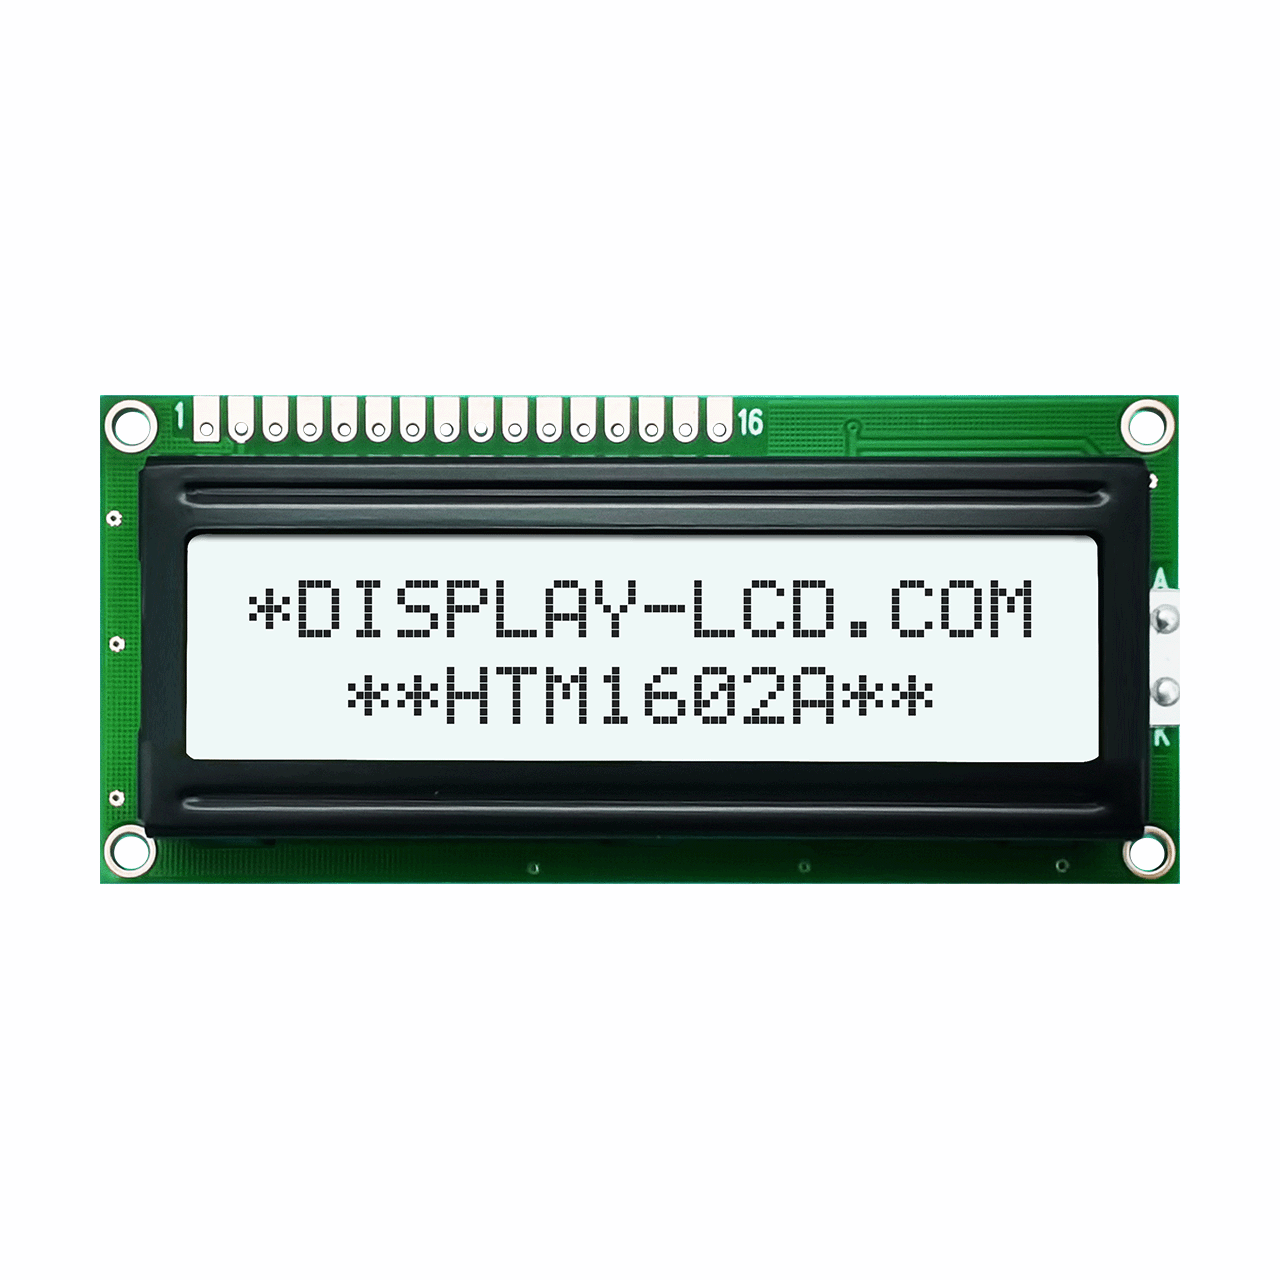 2X16 Character LCD Module Display | FSTN+  with White Backlight 5.0V-Arduino